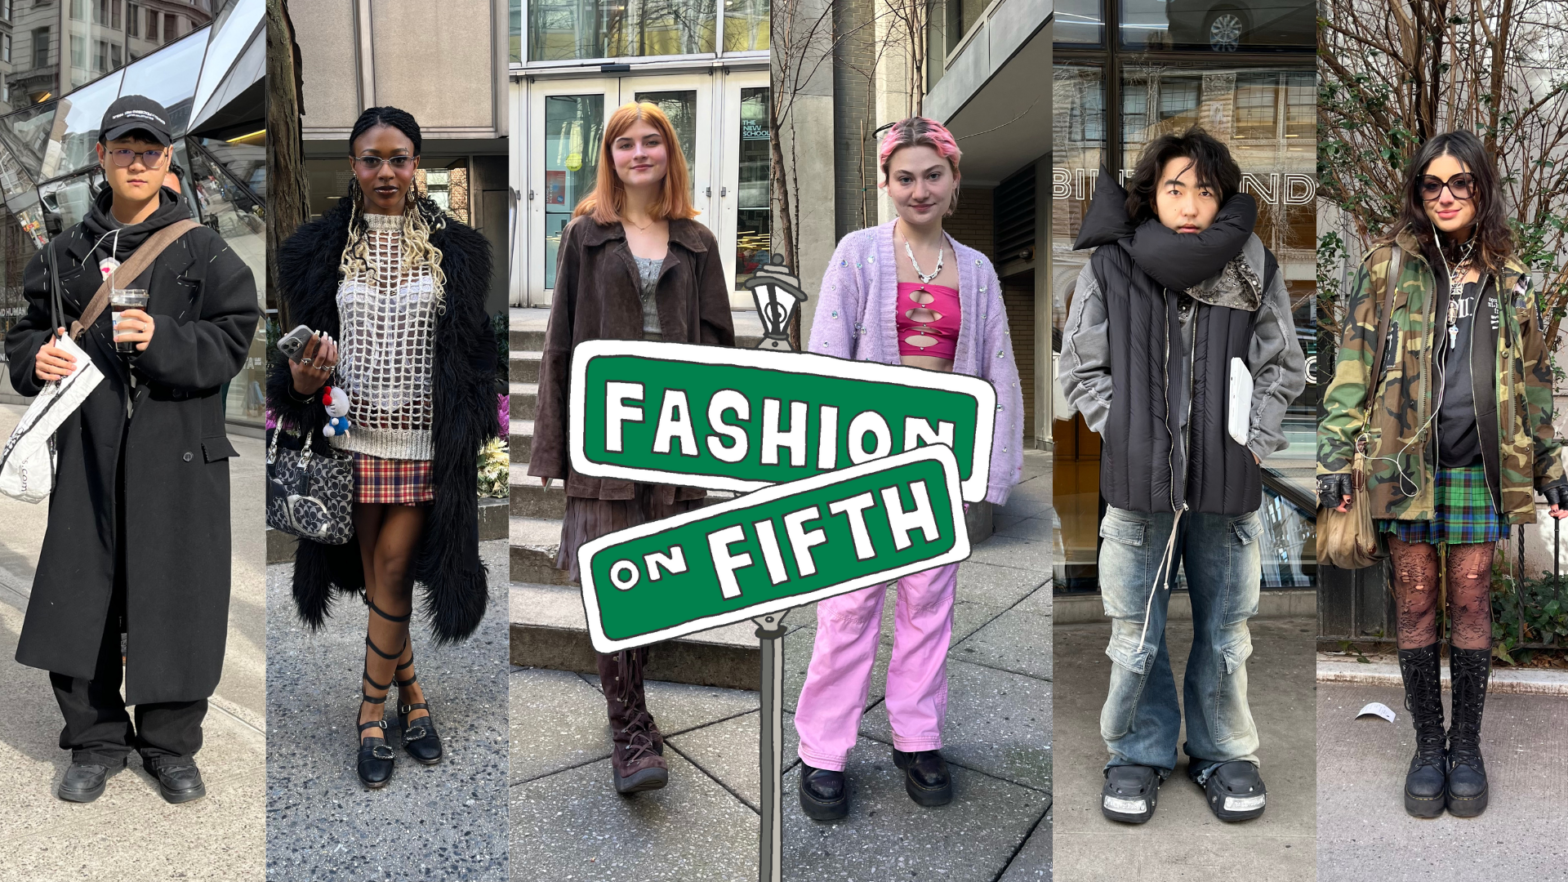 Six New School students collaged side-by-side. In the middle is an illustrated street sign that says “Fashion on Fifth.”